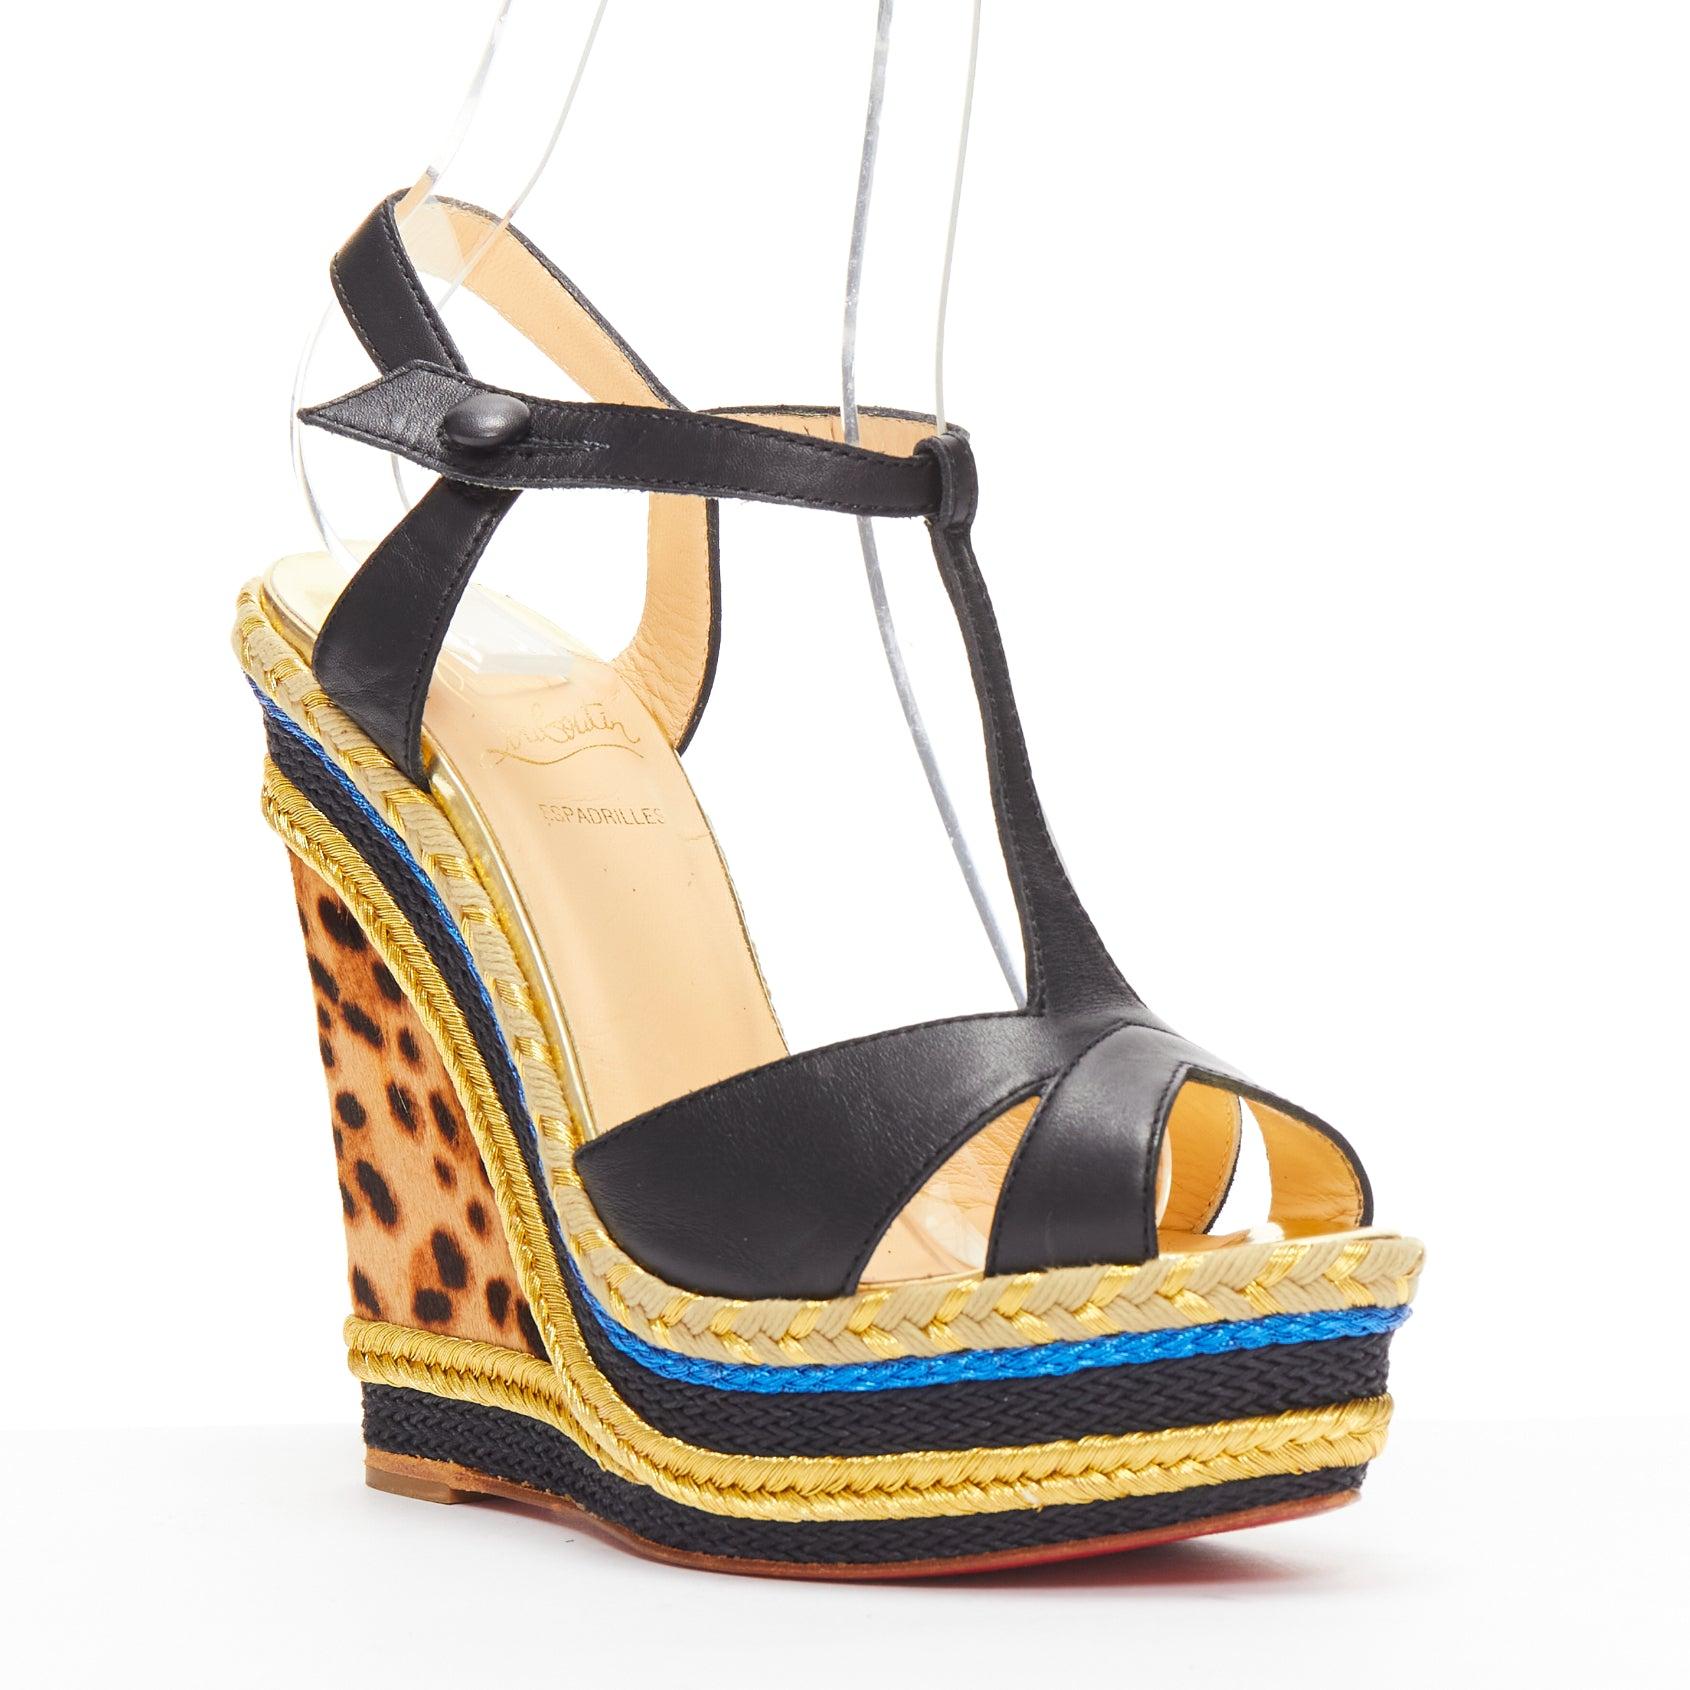 CHRISTIAN LOUBOUTIN Trotolita 140 brown leopard horsehair platform wedges EU36
Reference: MAFK/A00003
Brand: Christian Louboutin
Model: Trotolita 140
Material: Pony Hair, Leather, Fabric
Color: Black, Multicolour
Pattern: Leopard
Closure: Ankle